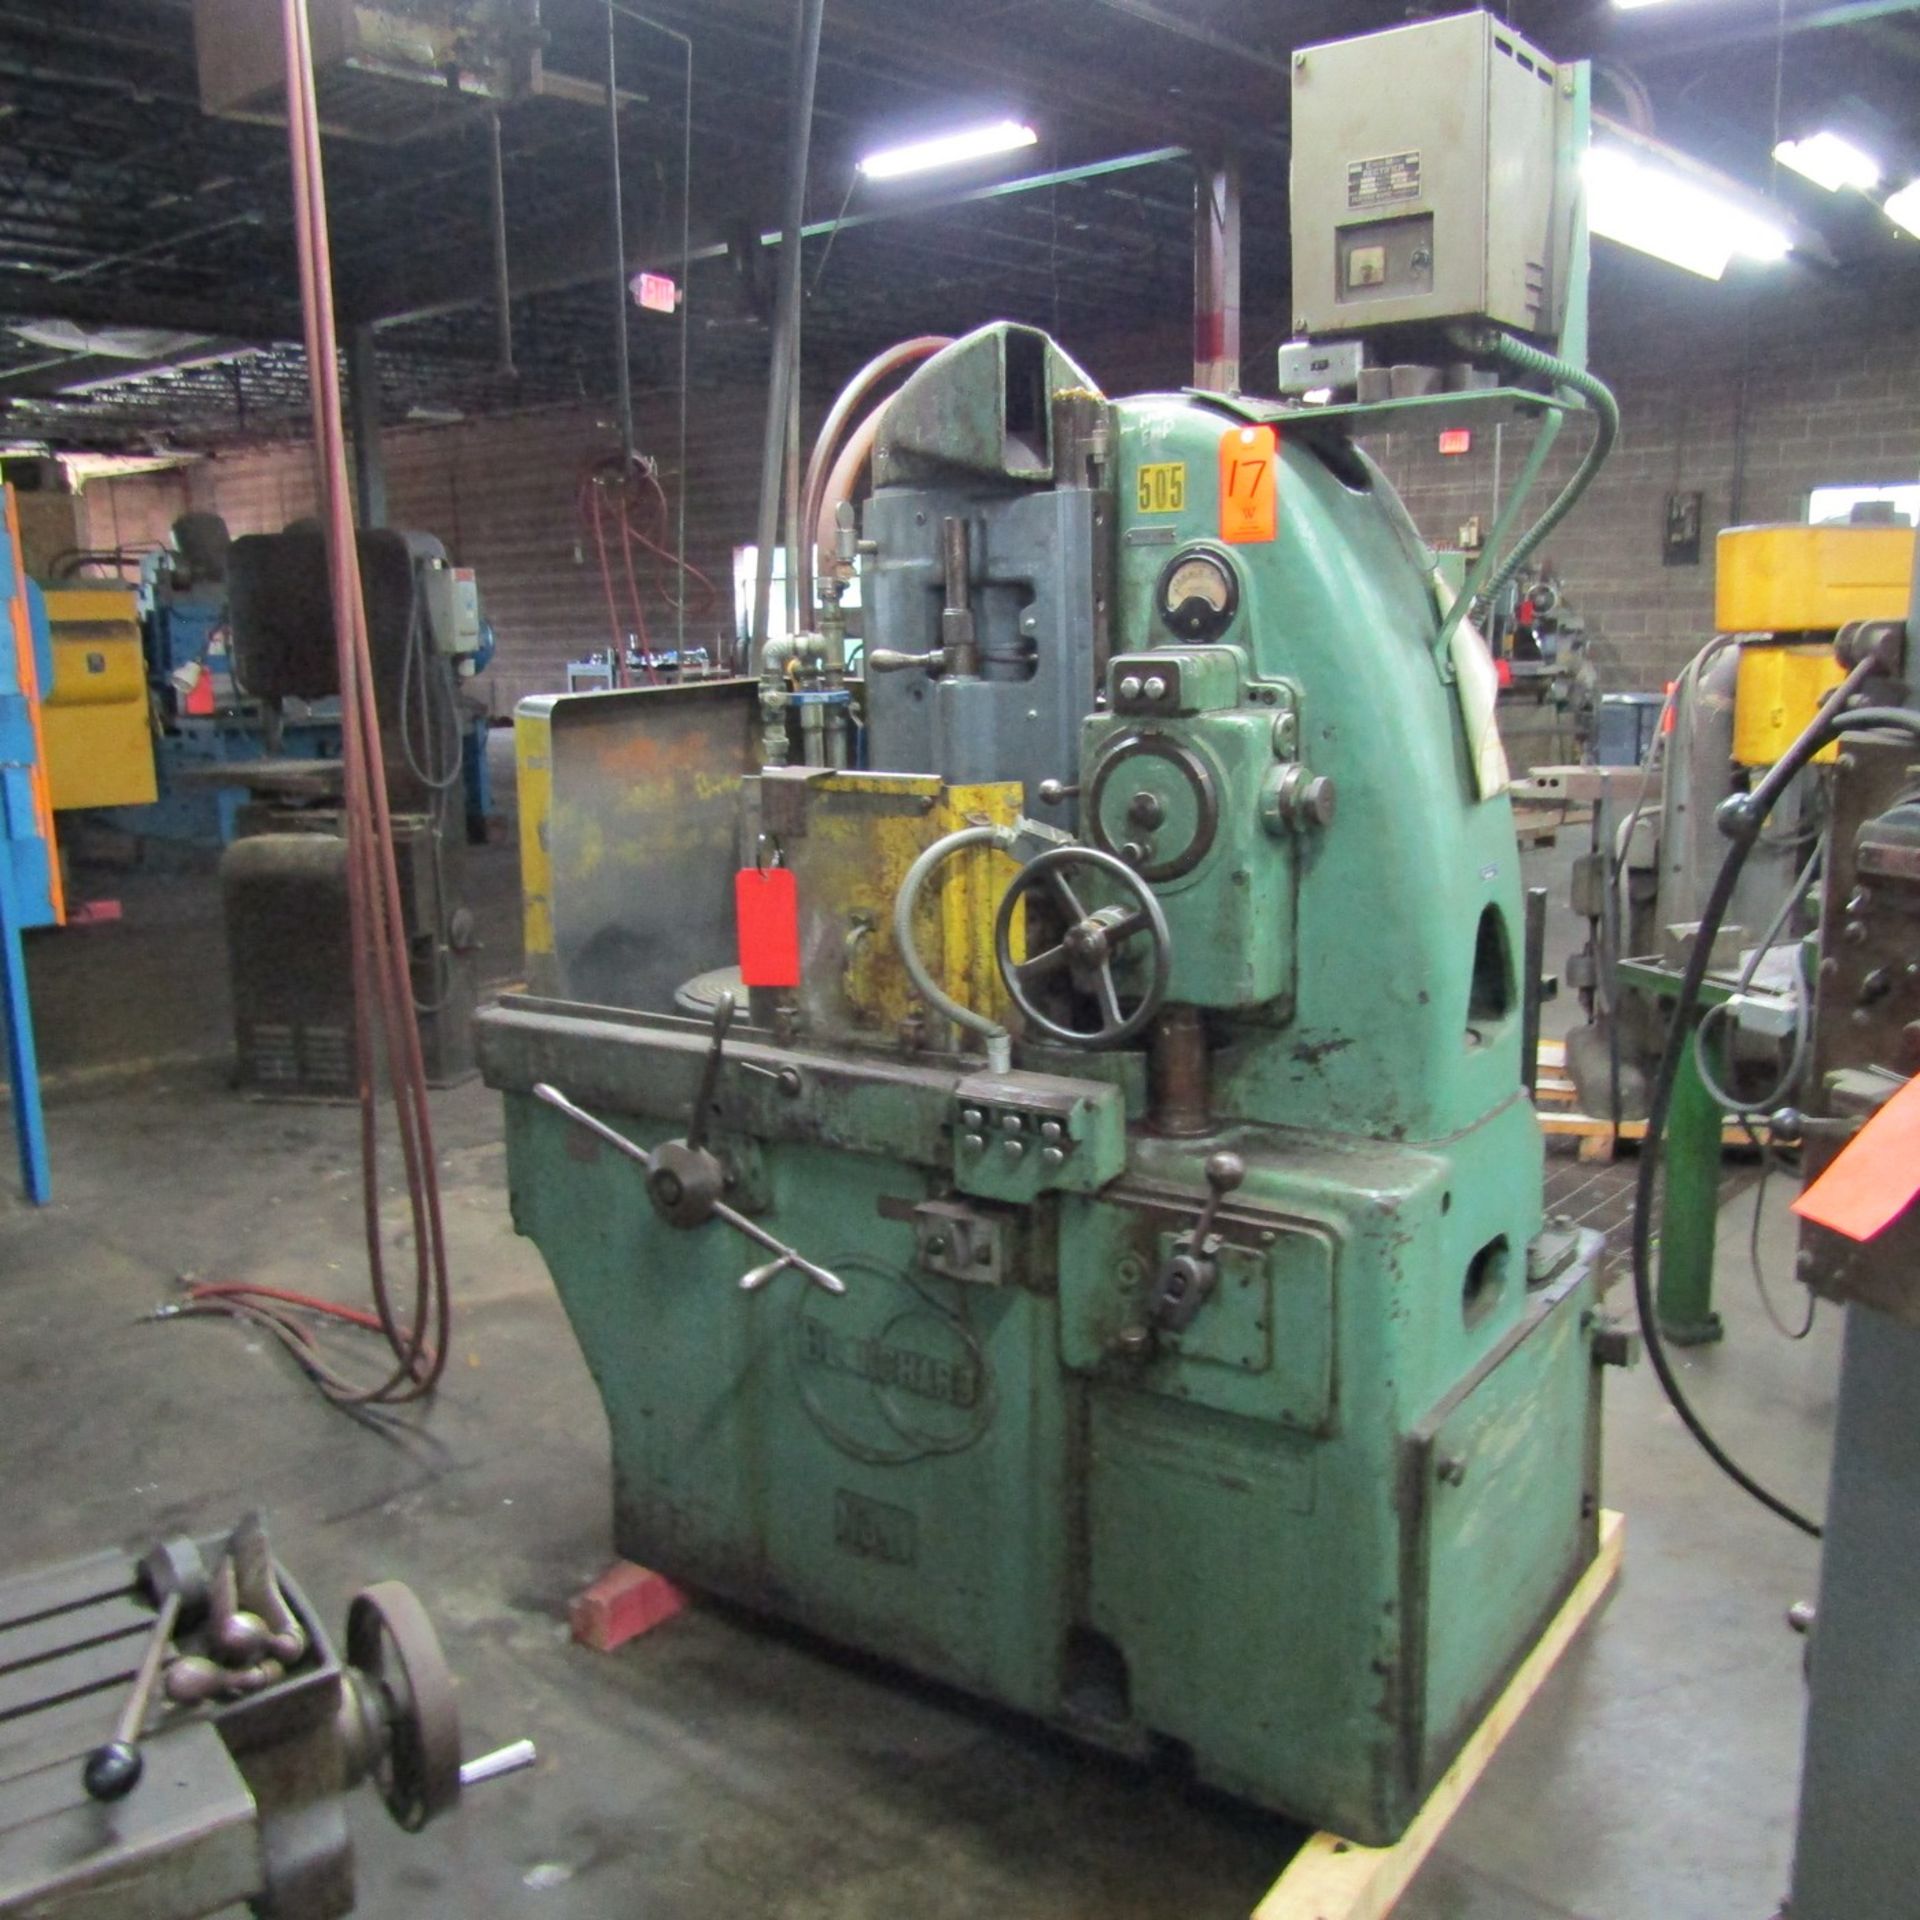 Blanchard No. 11 Rotary Surface Grinder, S/N: 5655; with 16 in. Dia. Chuck (Ref. #: 525) - Image 2 of 7